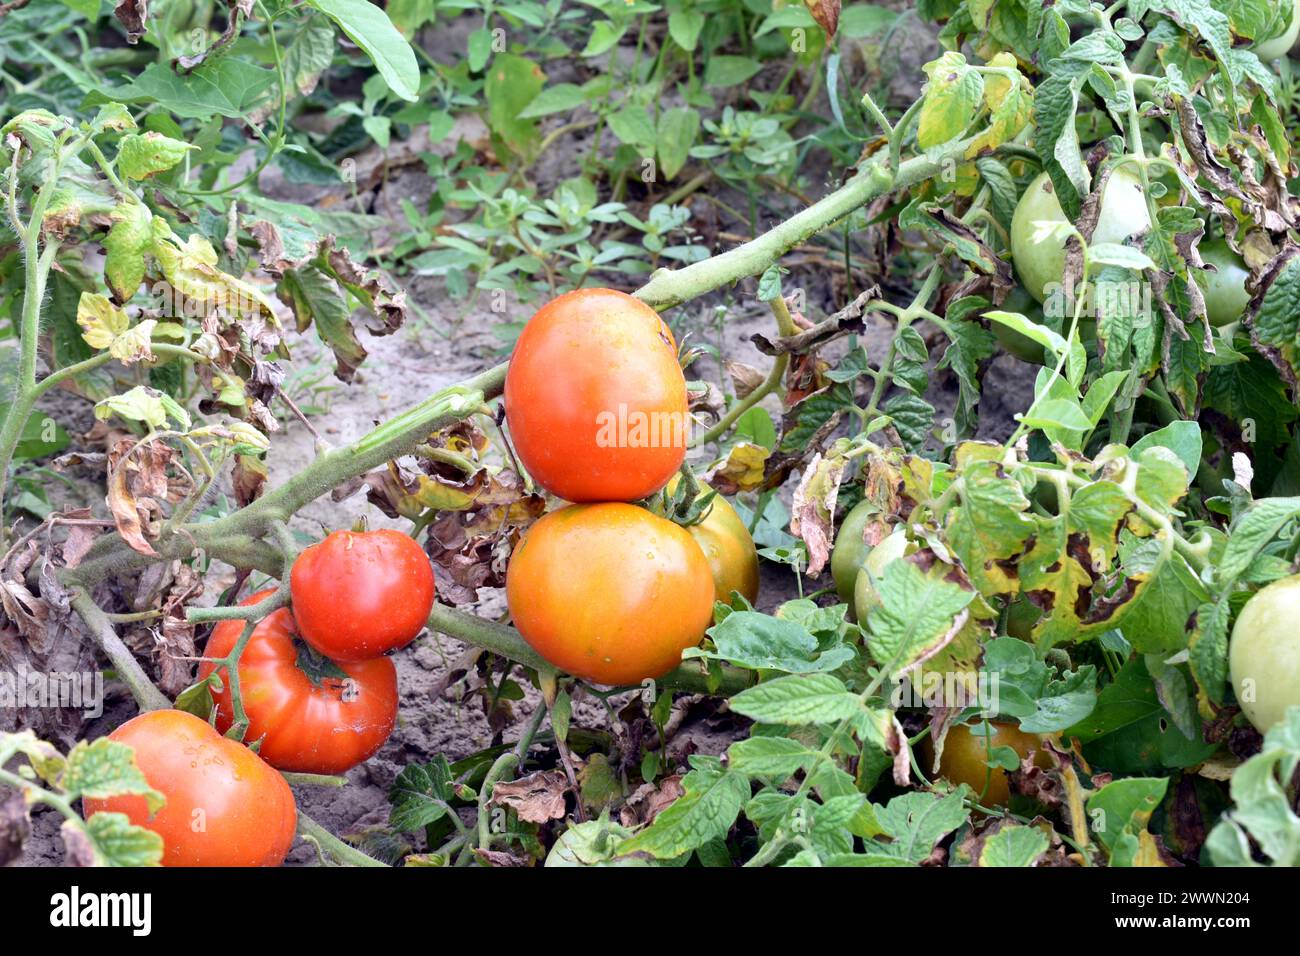 Red tomatoes are ripe on the branches of a tomato bush growing in the garden. Stock Photo